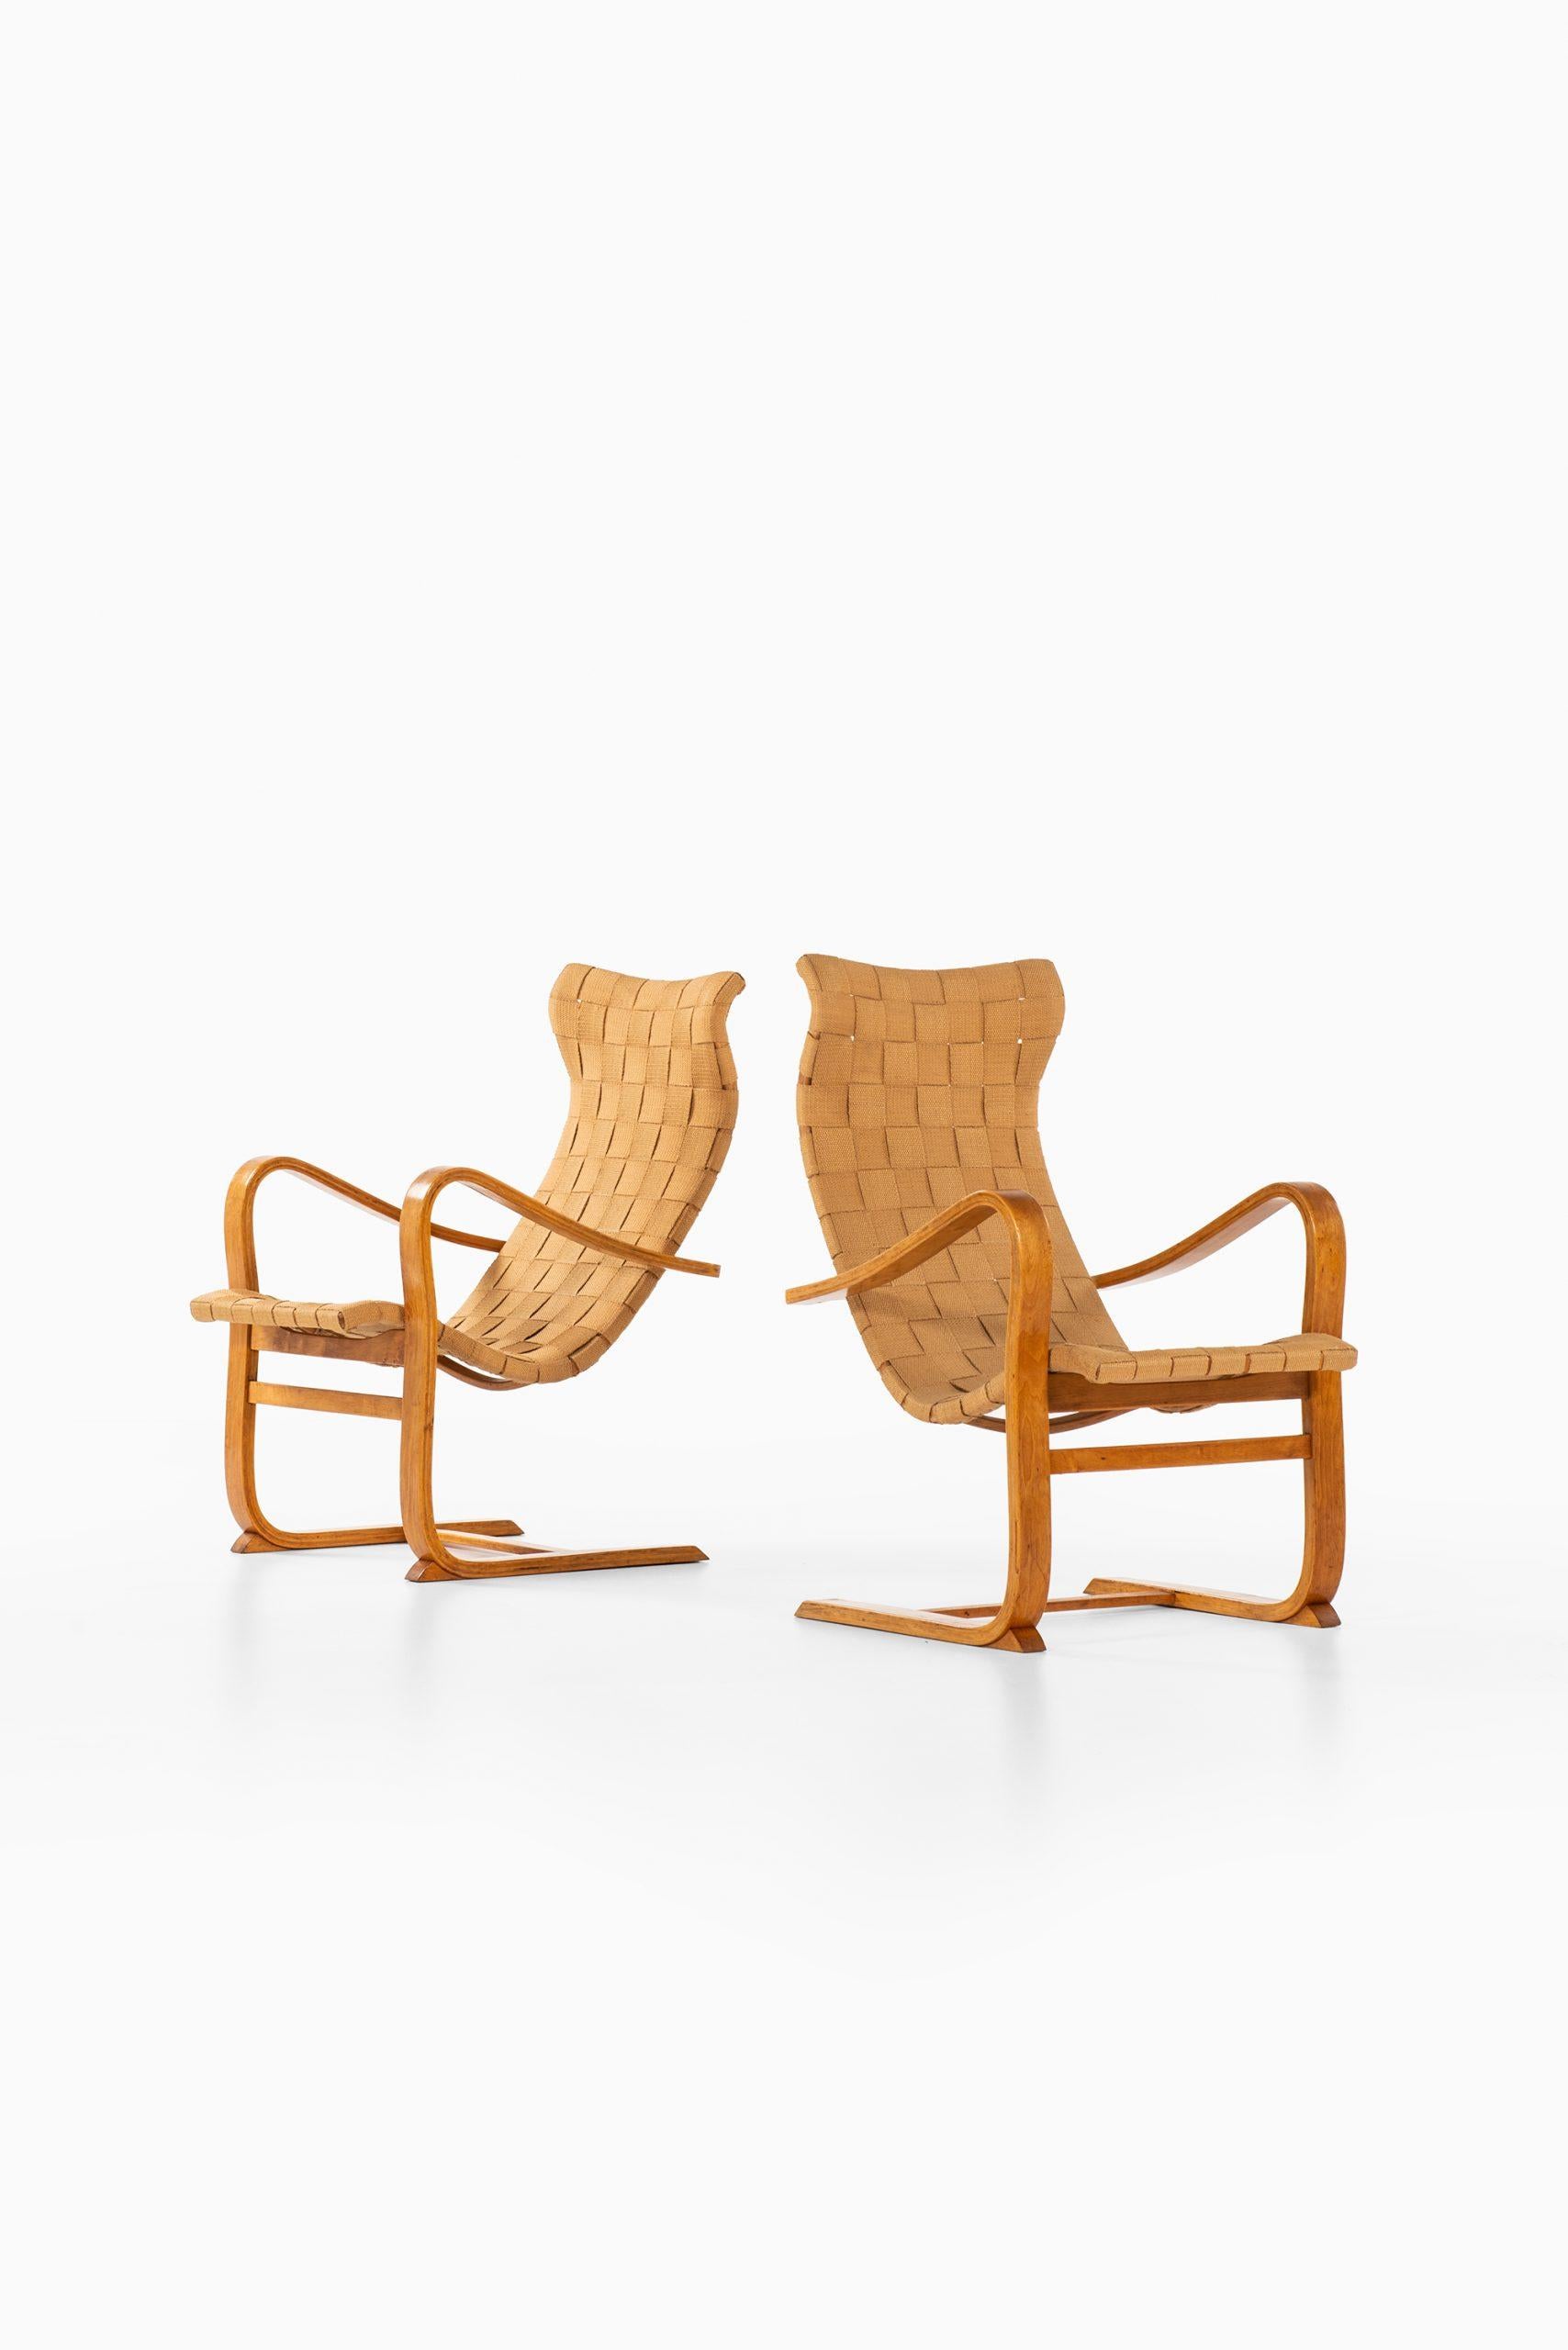 Rare pair of easy chairs model Patronen designed by Gustav Axel Berg. Produced in Sweden.